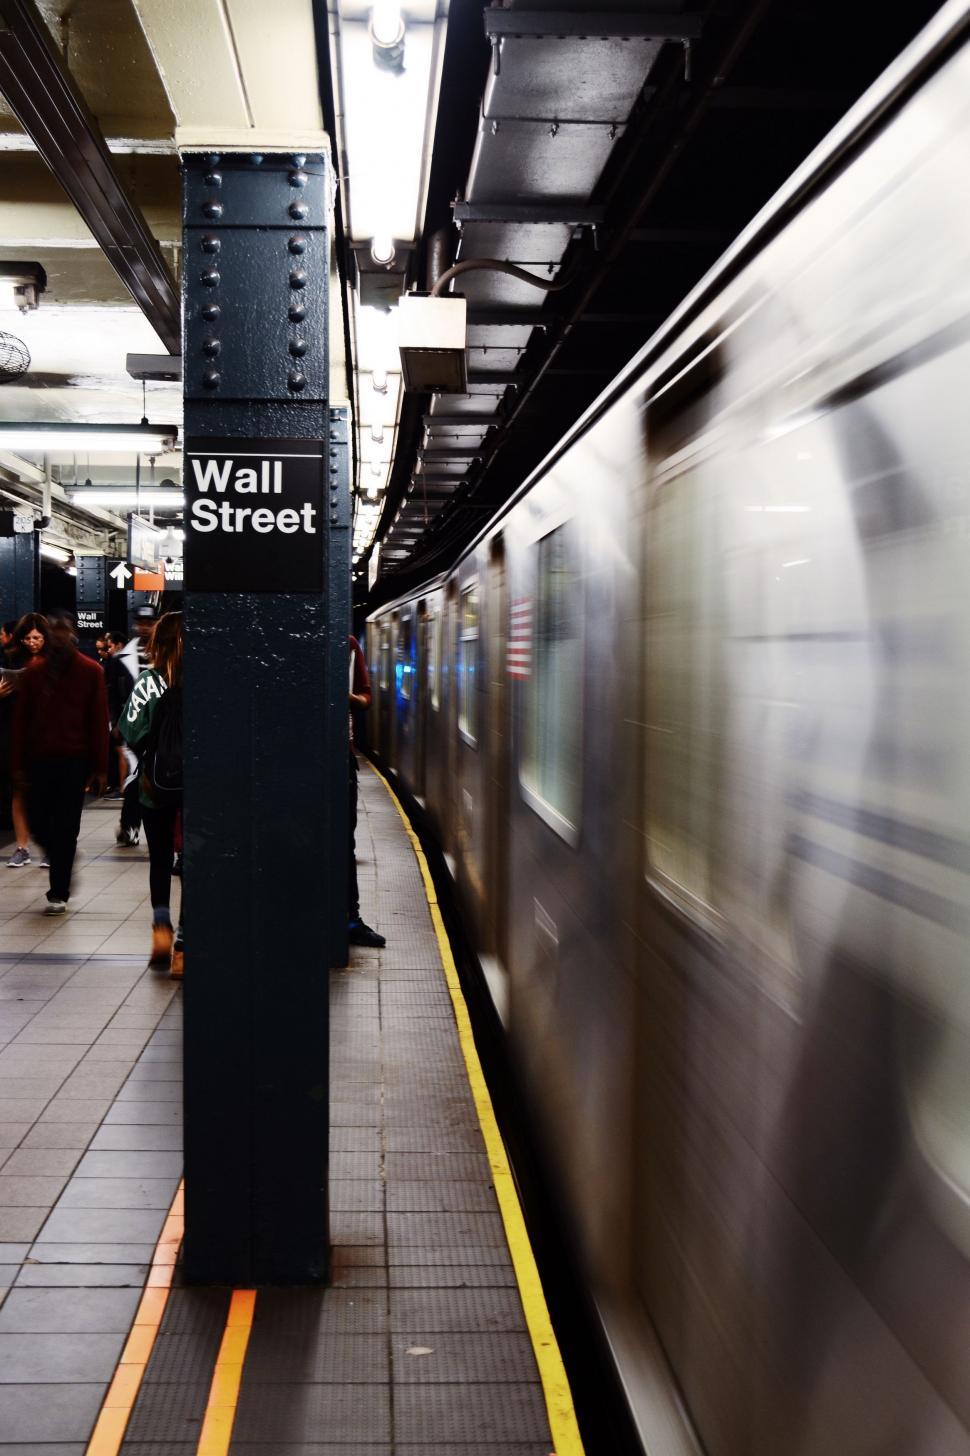 Free Image of Subway Station With Wall Street Sign 